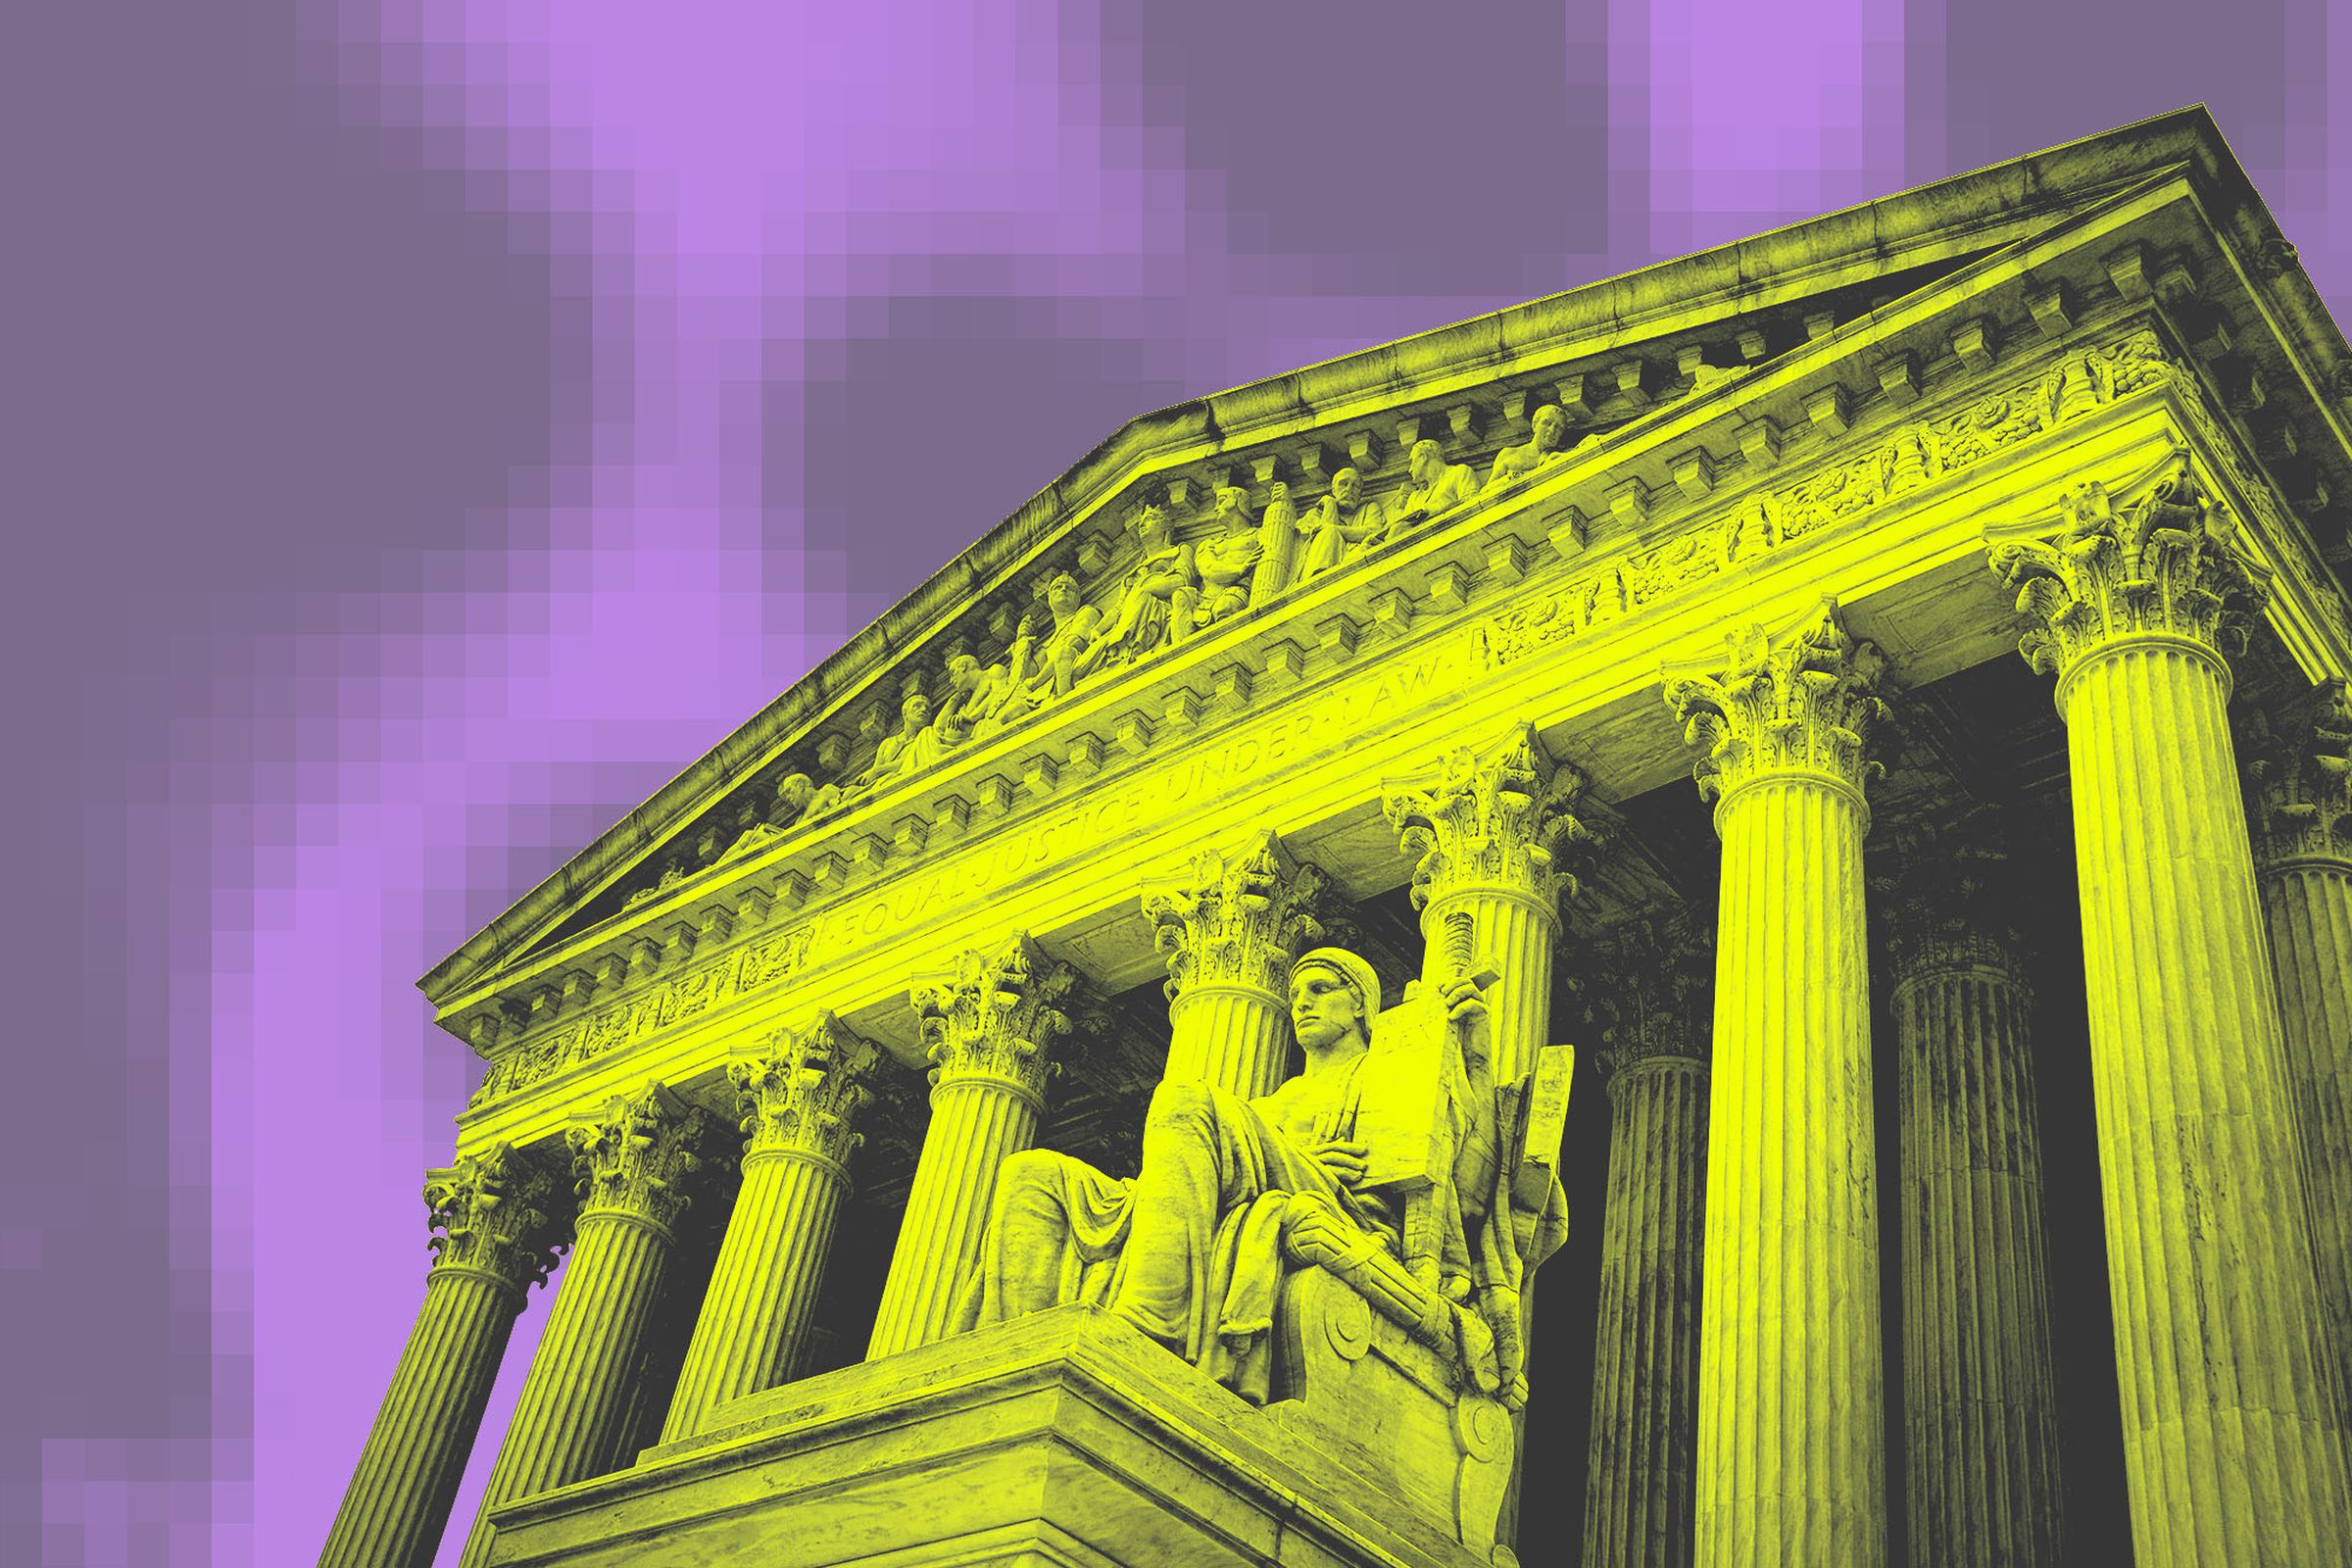 Photo illustration of the Supreme Court building with pixelated sky.